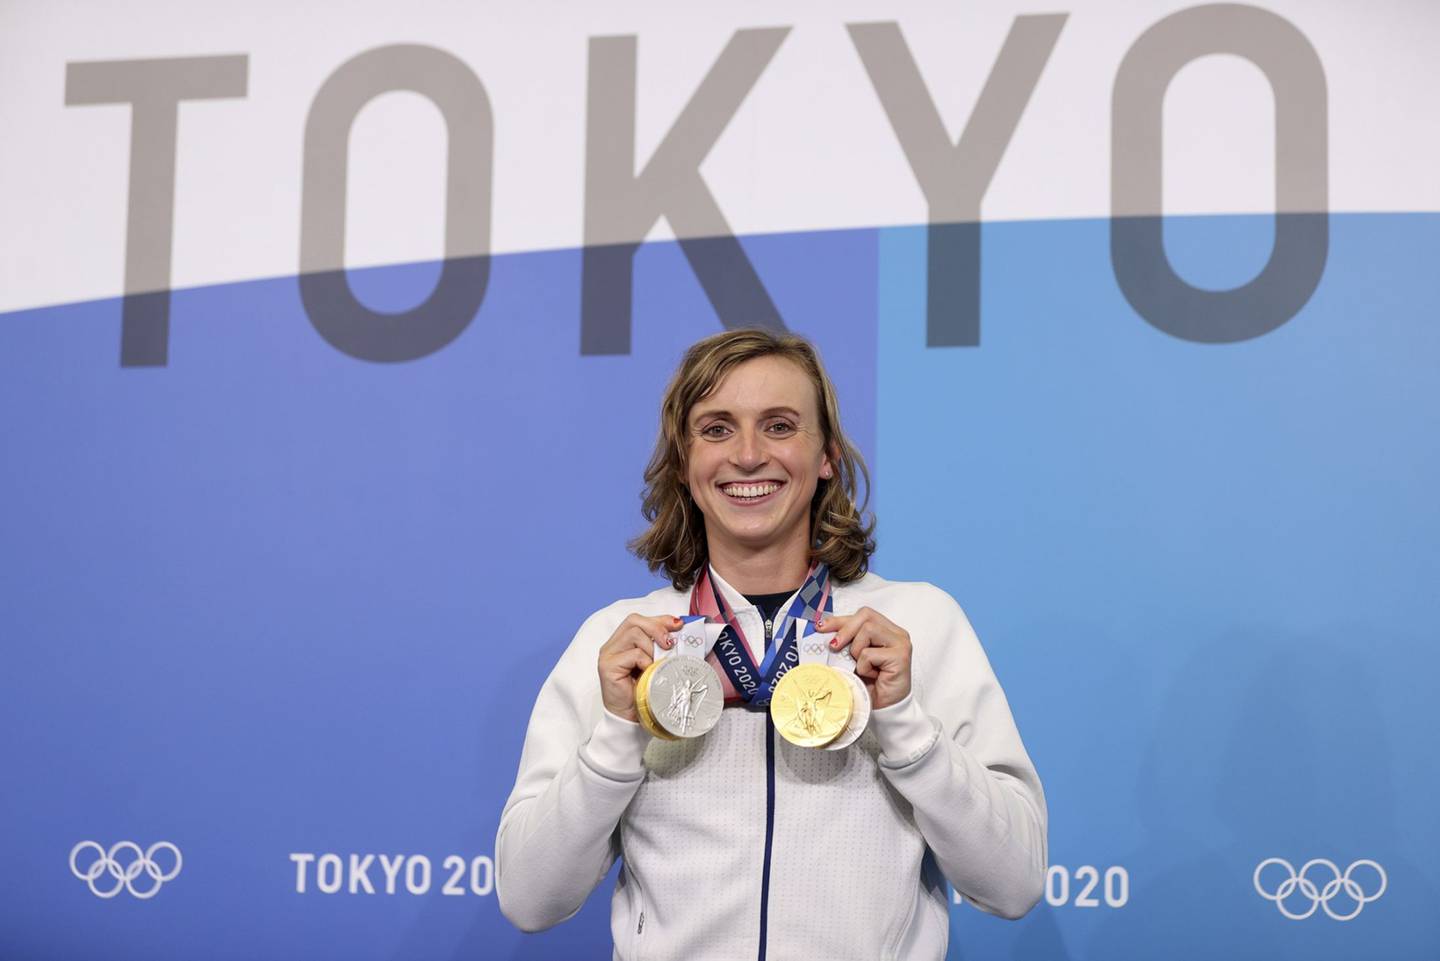 TOKYO, JAPAN - JULY 31: Katie Ledecky of Team USA poses with her two Gold and two Silver medals after a giving a press conference to the media during the Tokyo Olympic Games on July 31, 2021 in Tokyo, Japan.